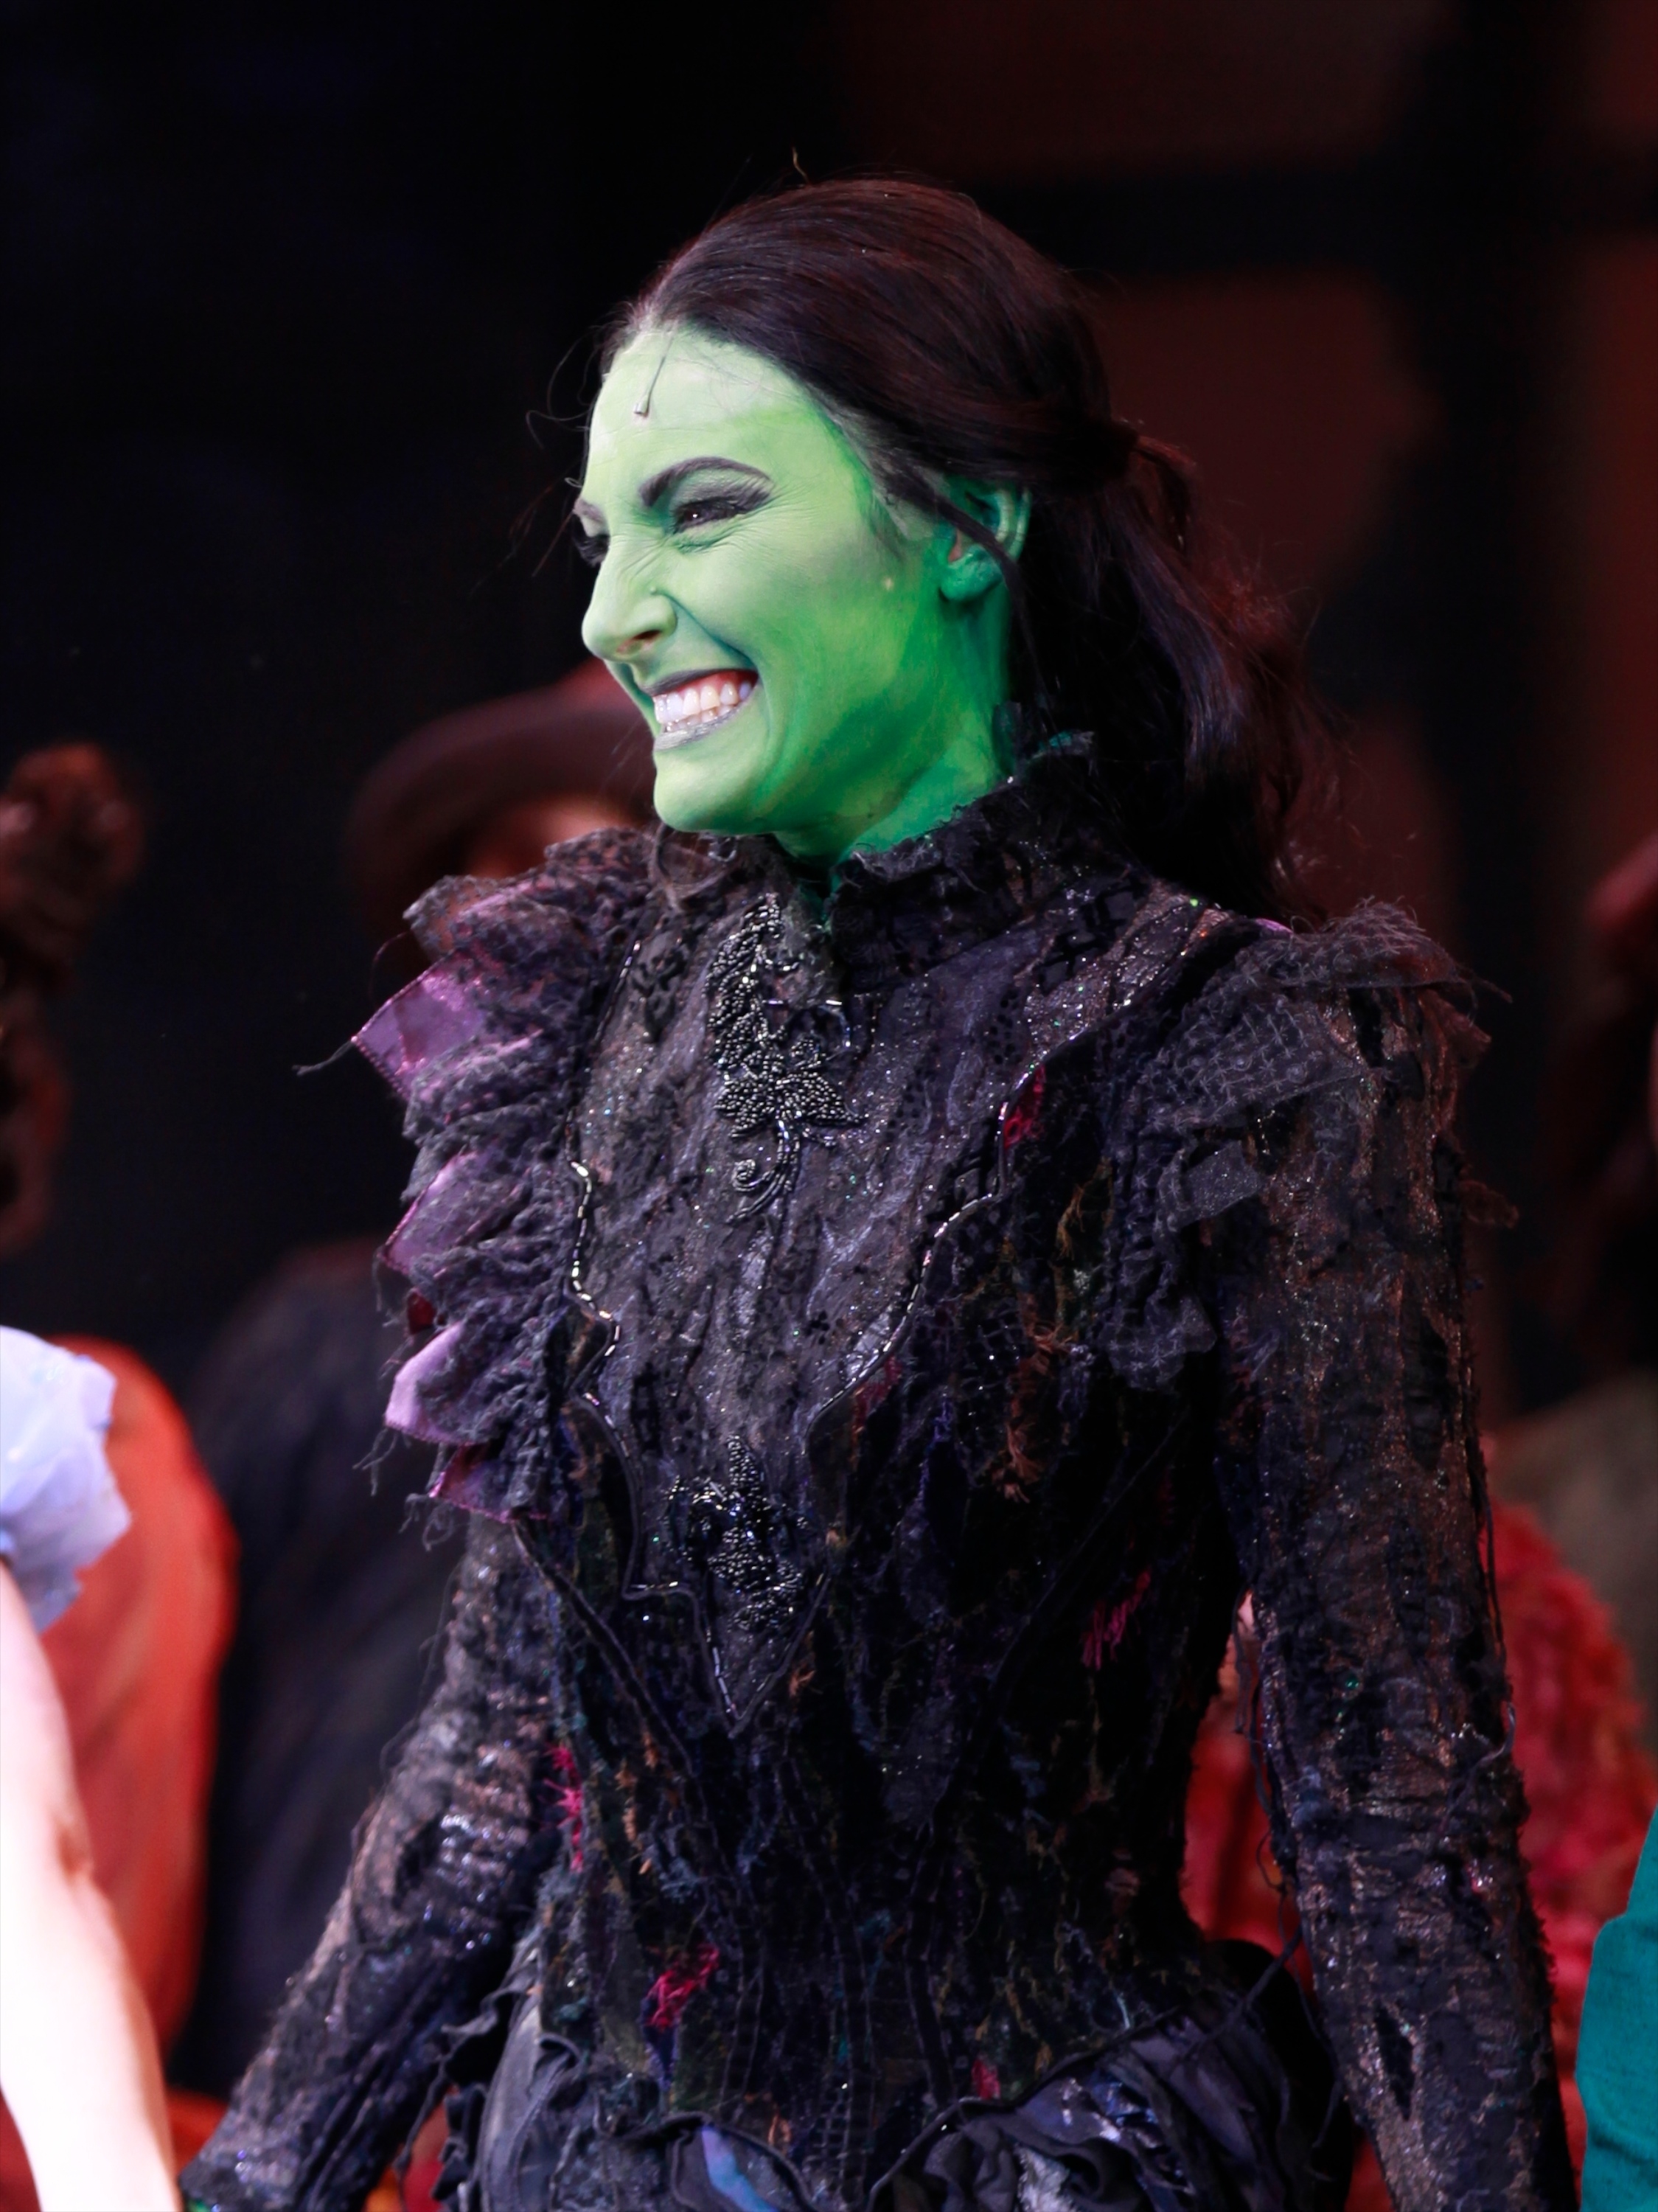 Willemijn smiling as Elphaba